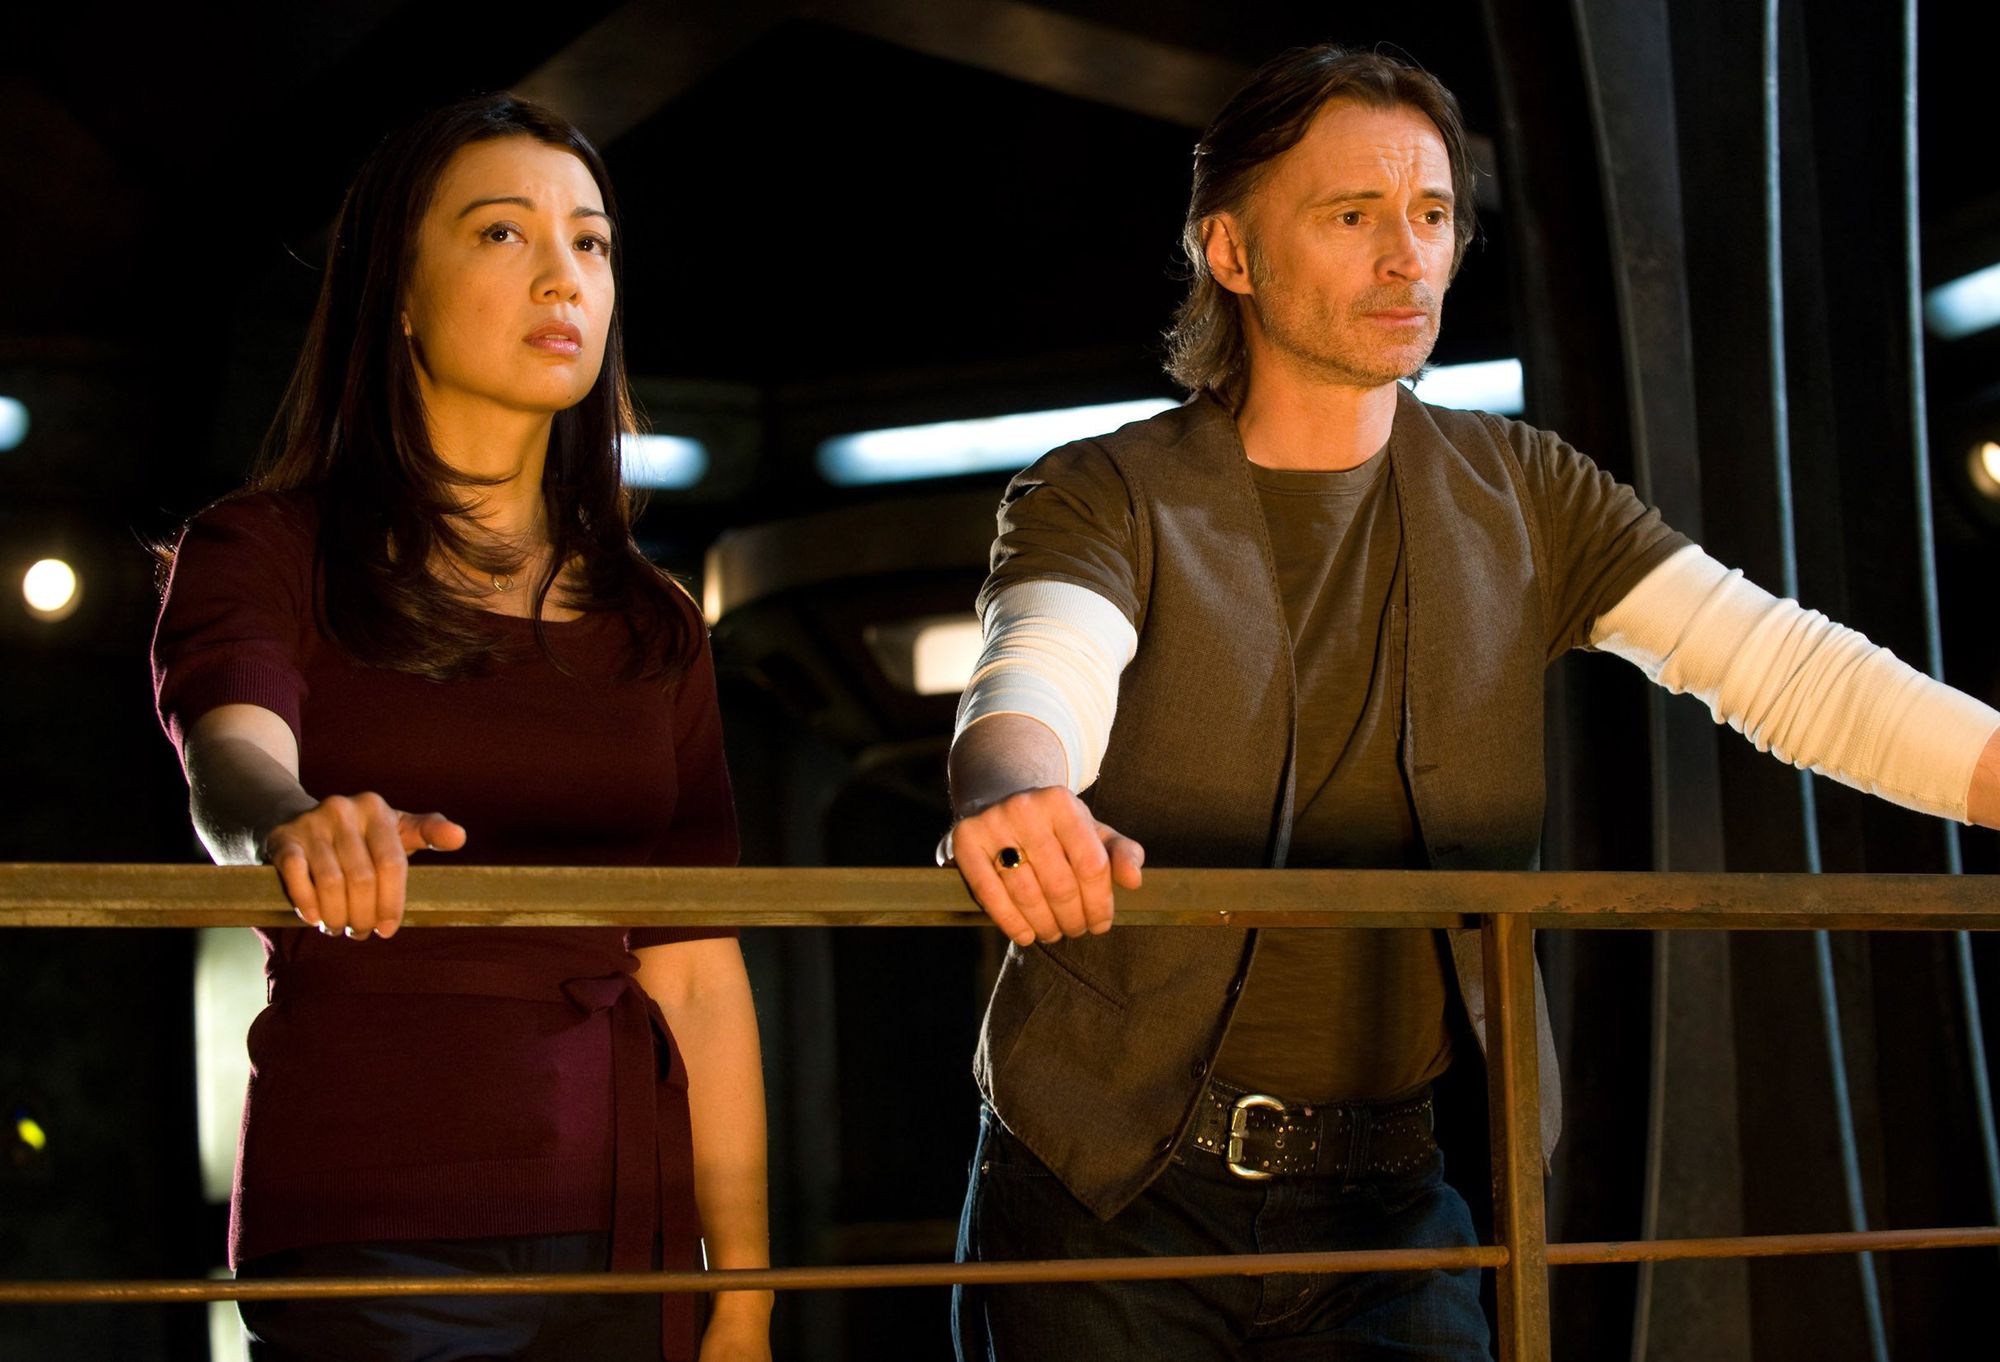 Camile Wray (Ming-Na Wen) and Nicholas Rush (Robert Carlyle) stand side by side, behind a rail.